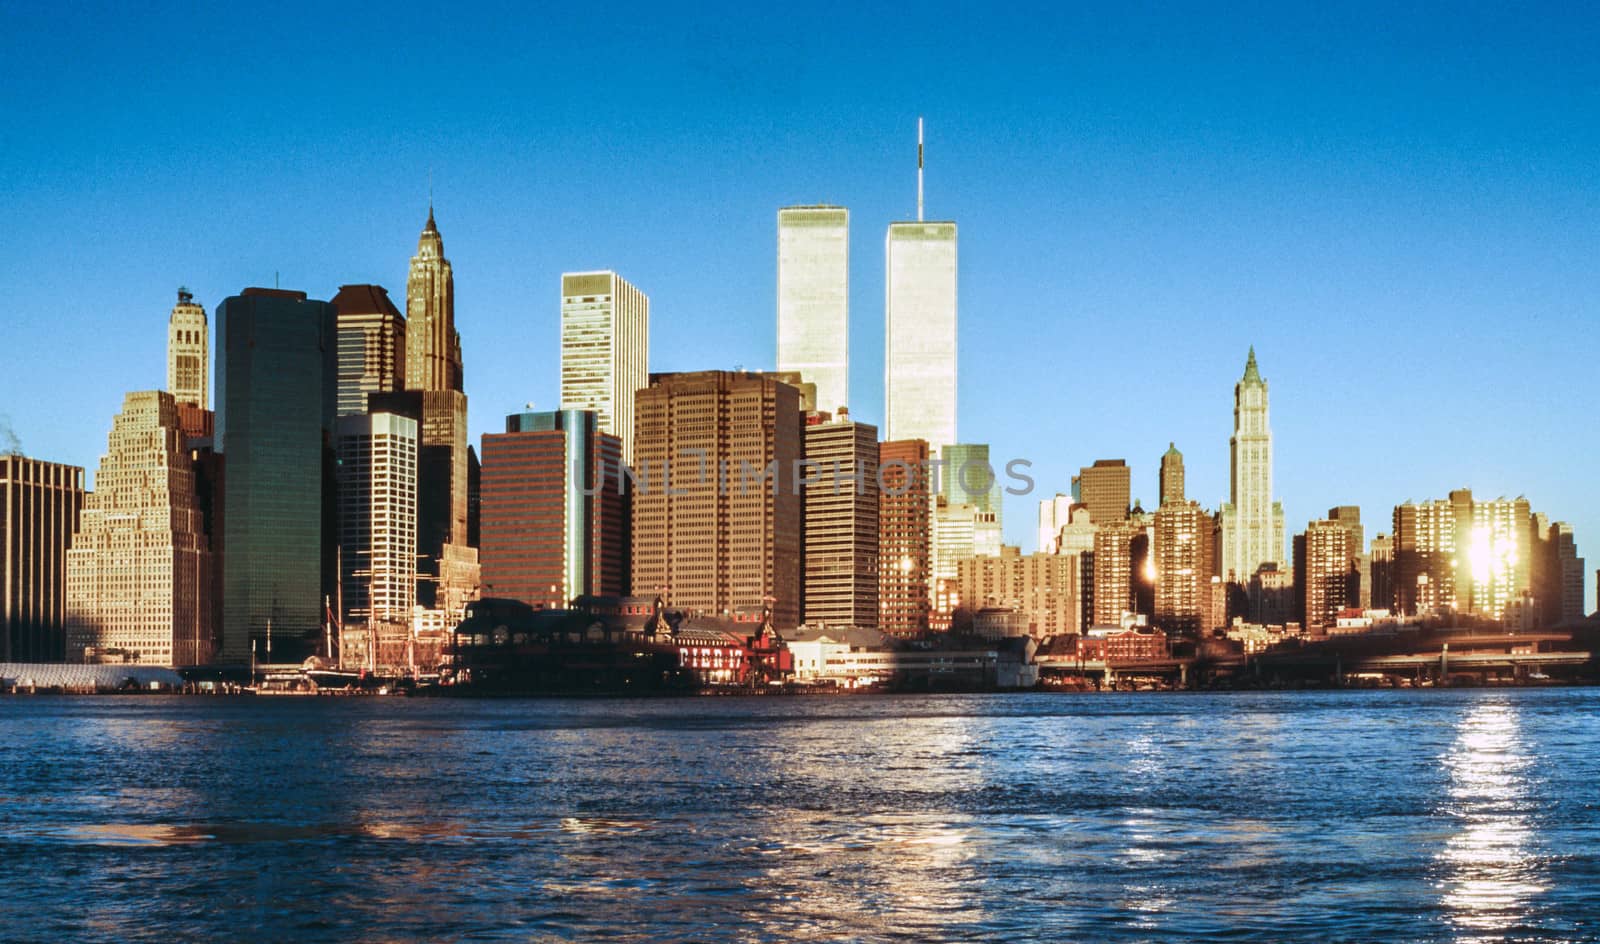 NEW YORK - SEPTEMBER 30: Lower mahattan and  World Trade Center on September 30, 1996 in New York City, America.  the WTC was destroyed by 911 from terrorists.